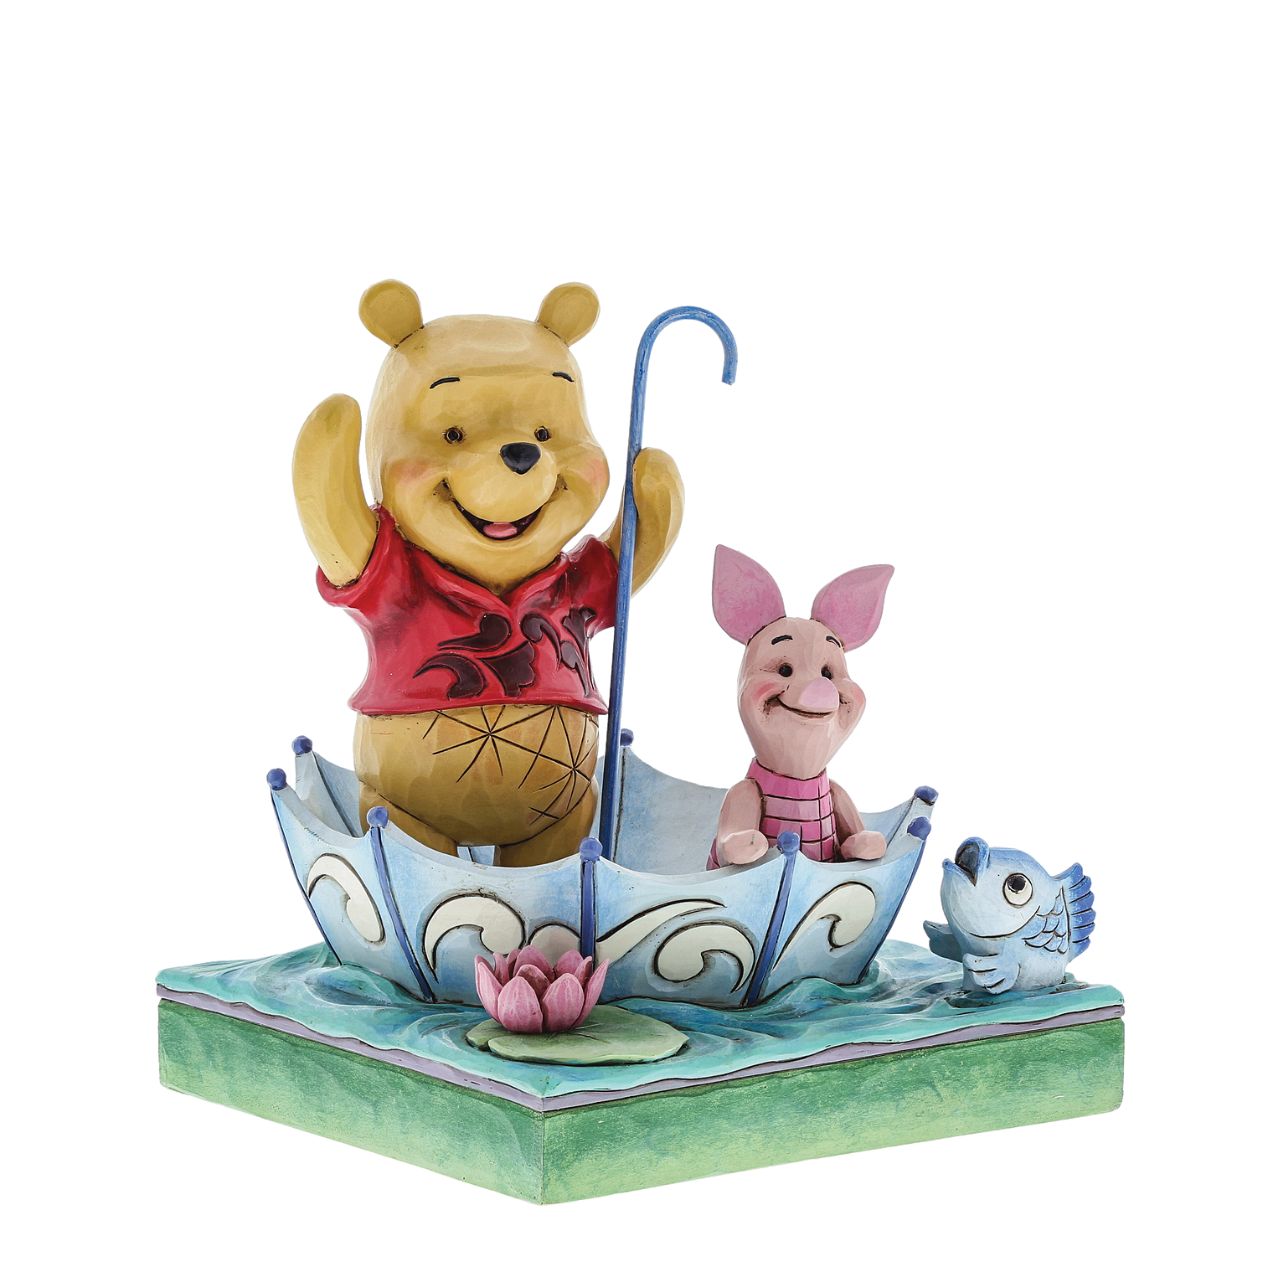 Jim Shore 50 Years of Friendship Winnie the Pooh and Piglet Figurine  Winnie the Pooh and Piglet celebrate "50 Years of Friendship" while sharing smiles and an umbrella raft in this charming creation featuring the beloved Disney characters and the heartfelt style of folk artist Jim Shore.